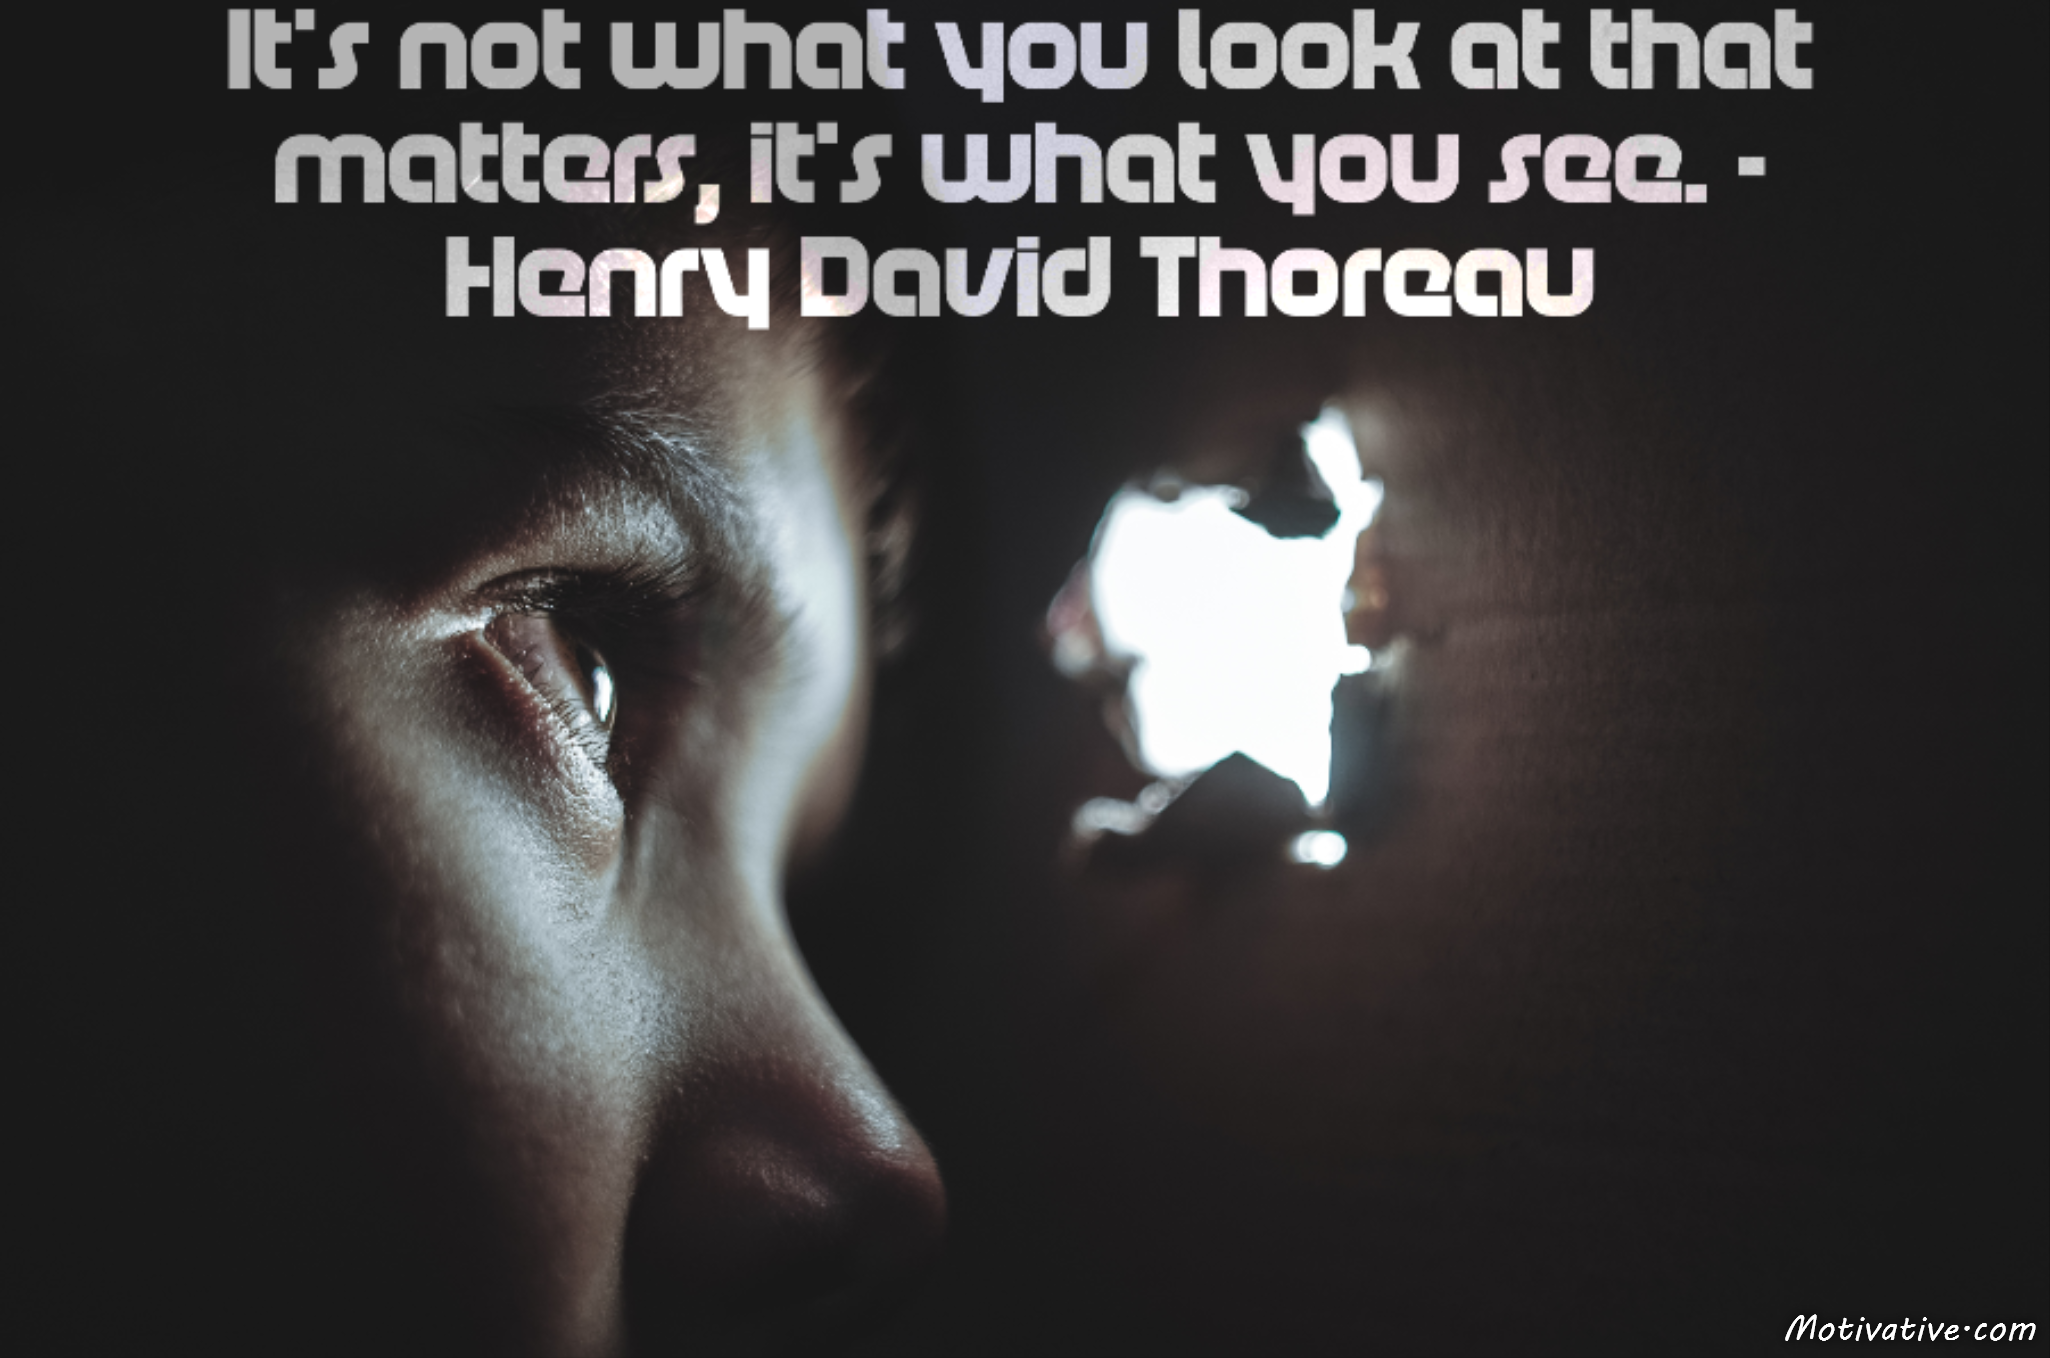 It’s not what you look at that matters, it’s what you see. – Henry David Thoreau